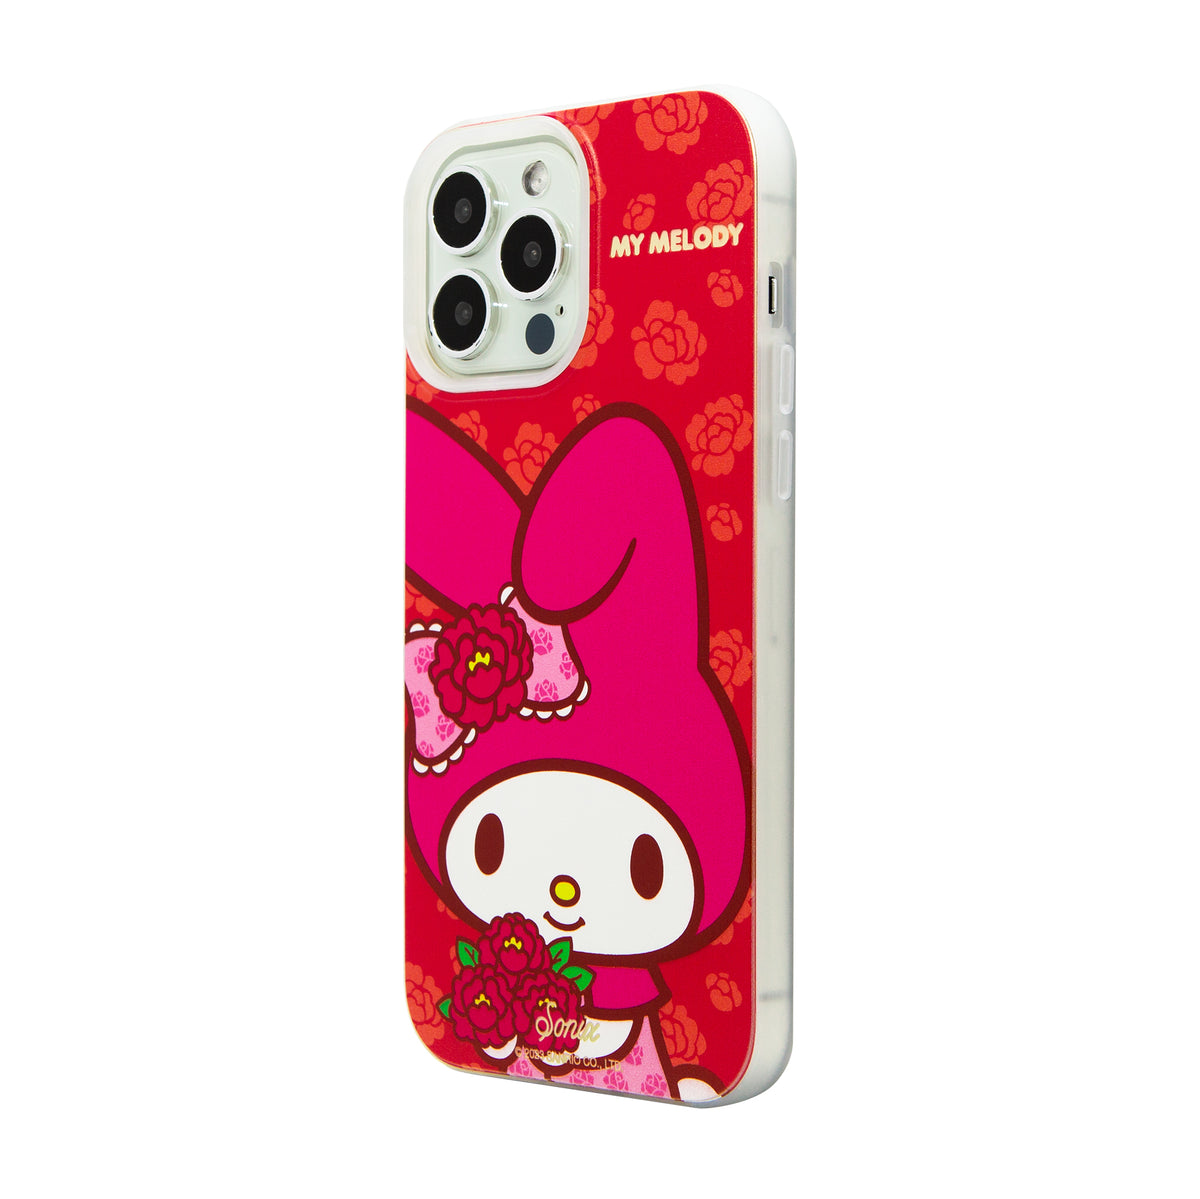 Cruisin' Hello Kitty MagSafe Compatible iPhone 12 Pro Case from Sonix